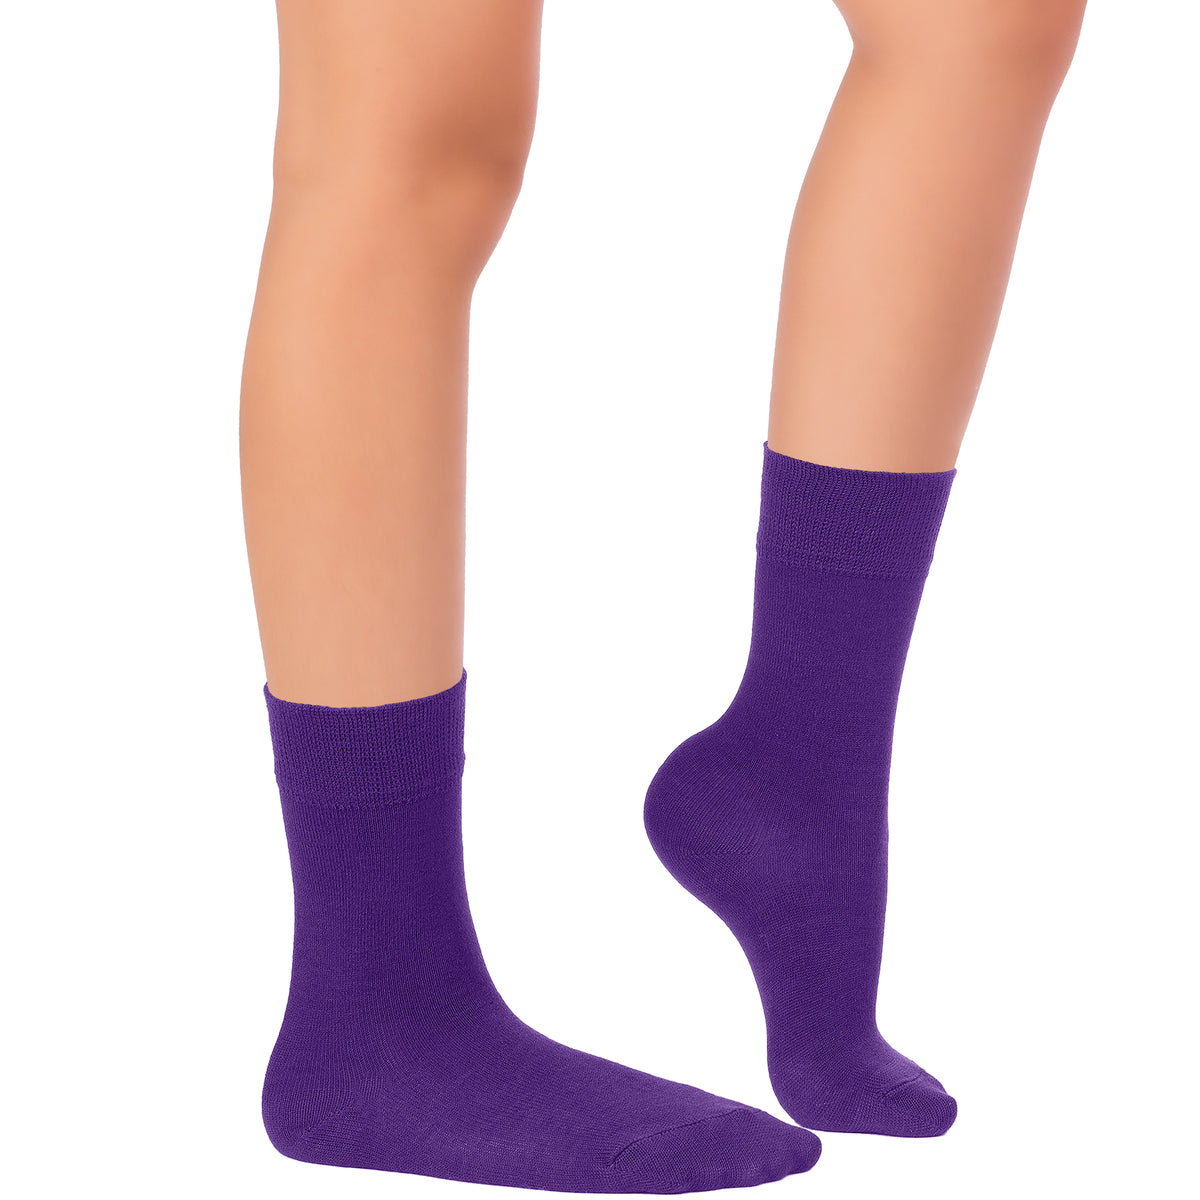 This image depicts a woman's legs adorned in purple socks made of bamboo material from the 'Kids' Dress Crew' collection.